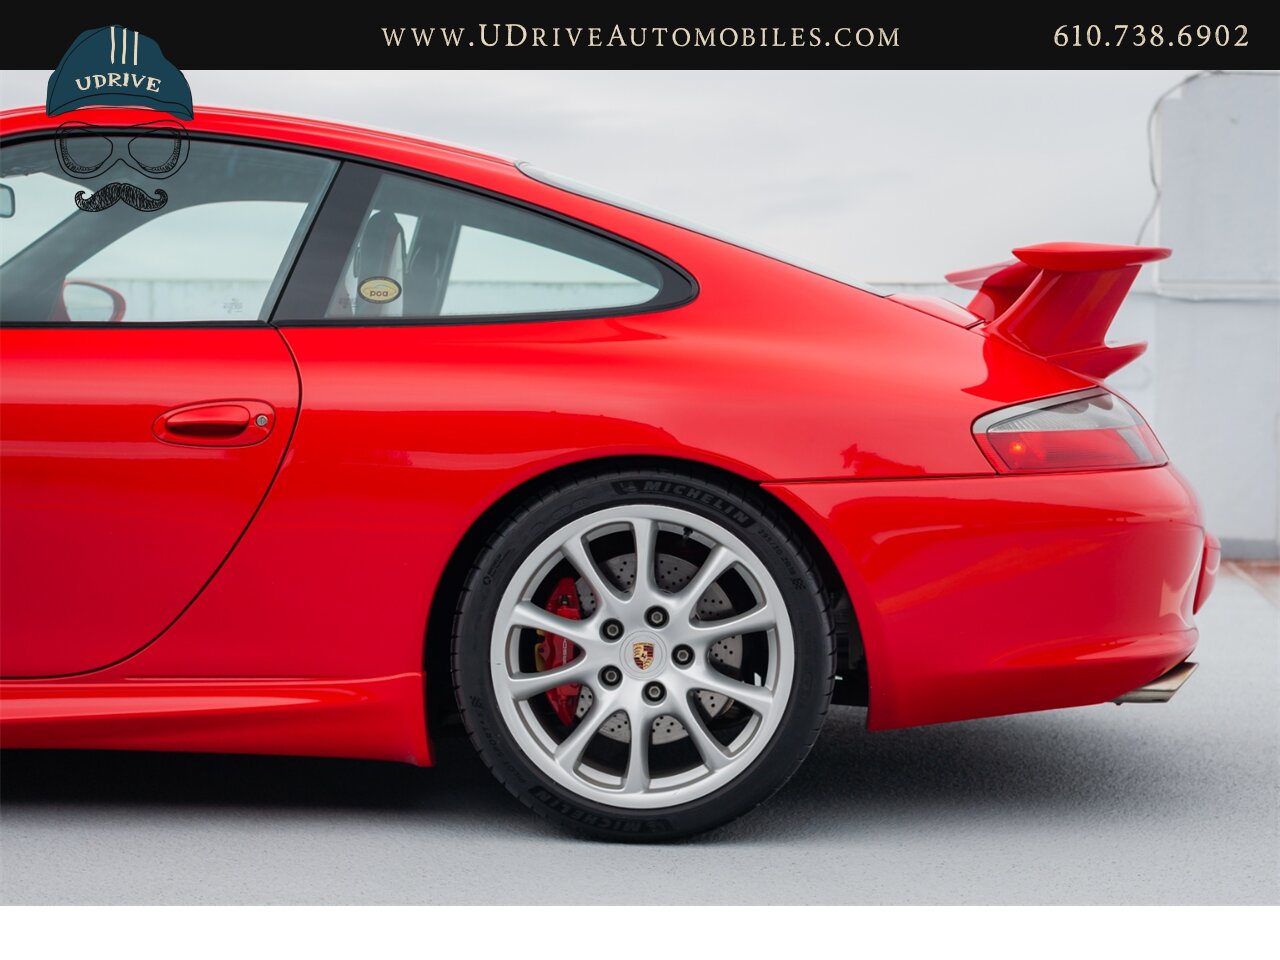 2004 Porsche 911 996 GT3 Guards Red Sport Seats Painted Hardbacks  Painted Center Console 18k Miles - Photo 28 - West Chester, PA 19382